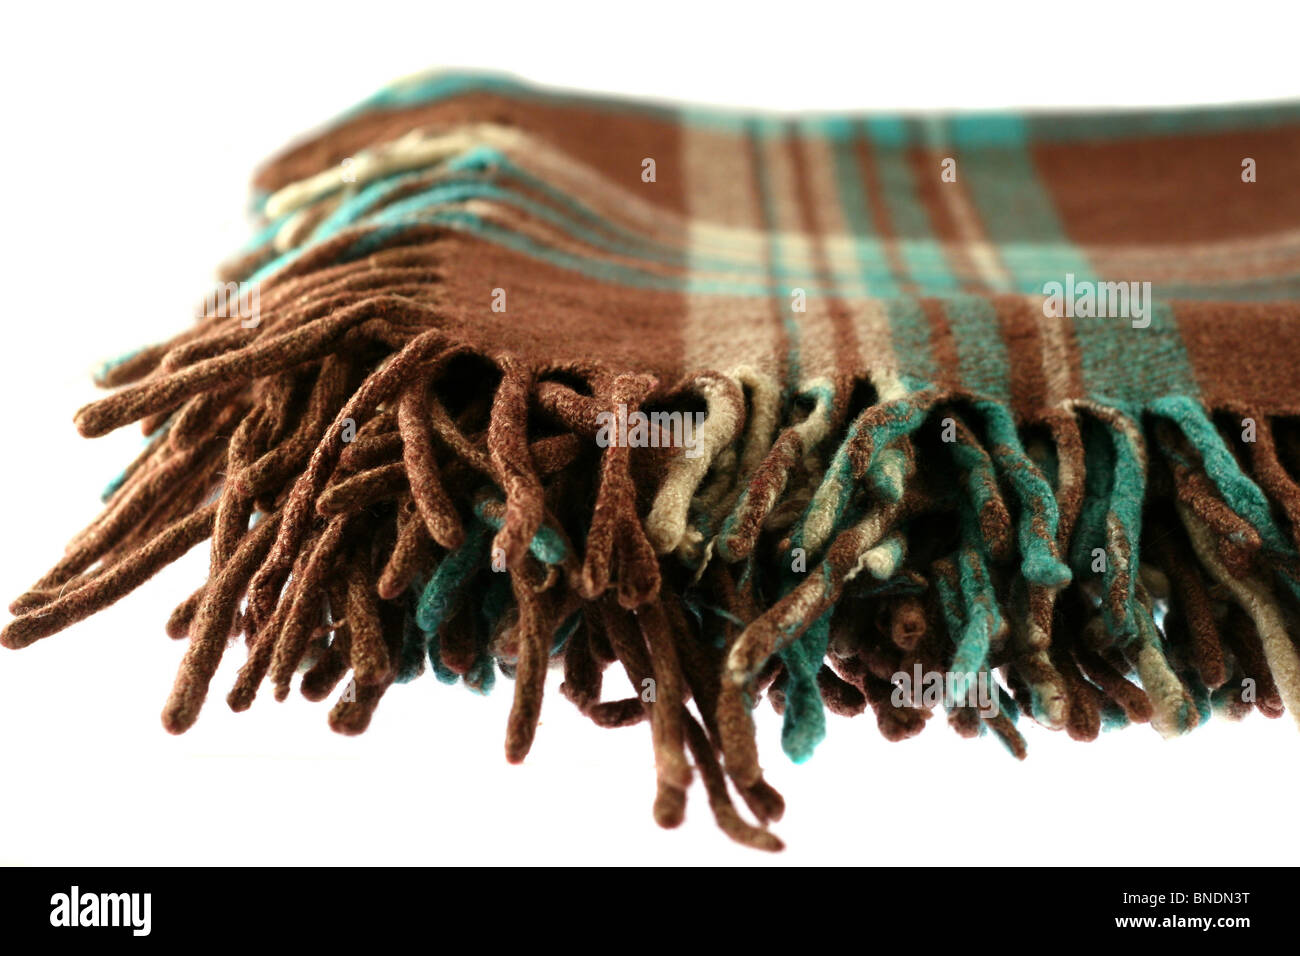 Brown-green checkered tartan wool blanket with fringe isolated on white Stock Photo